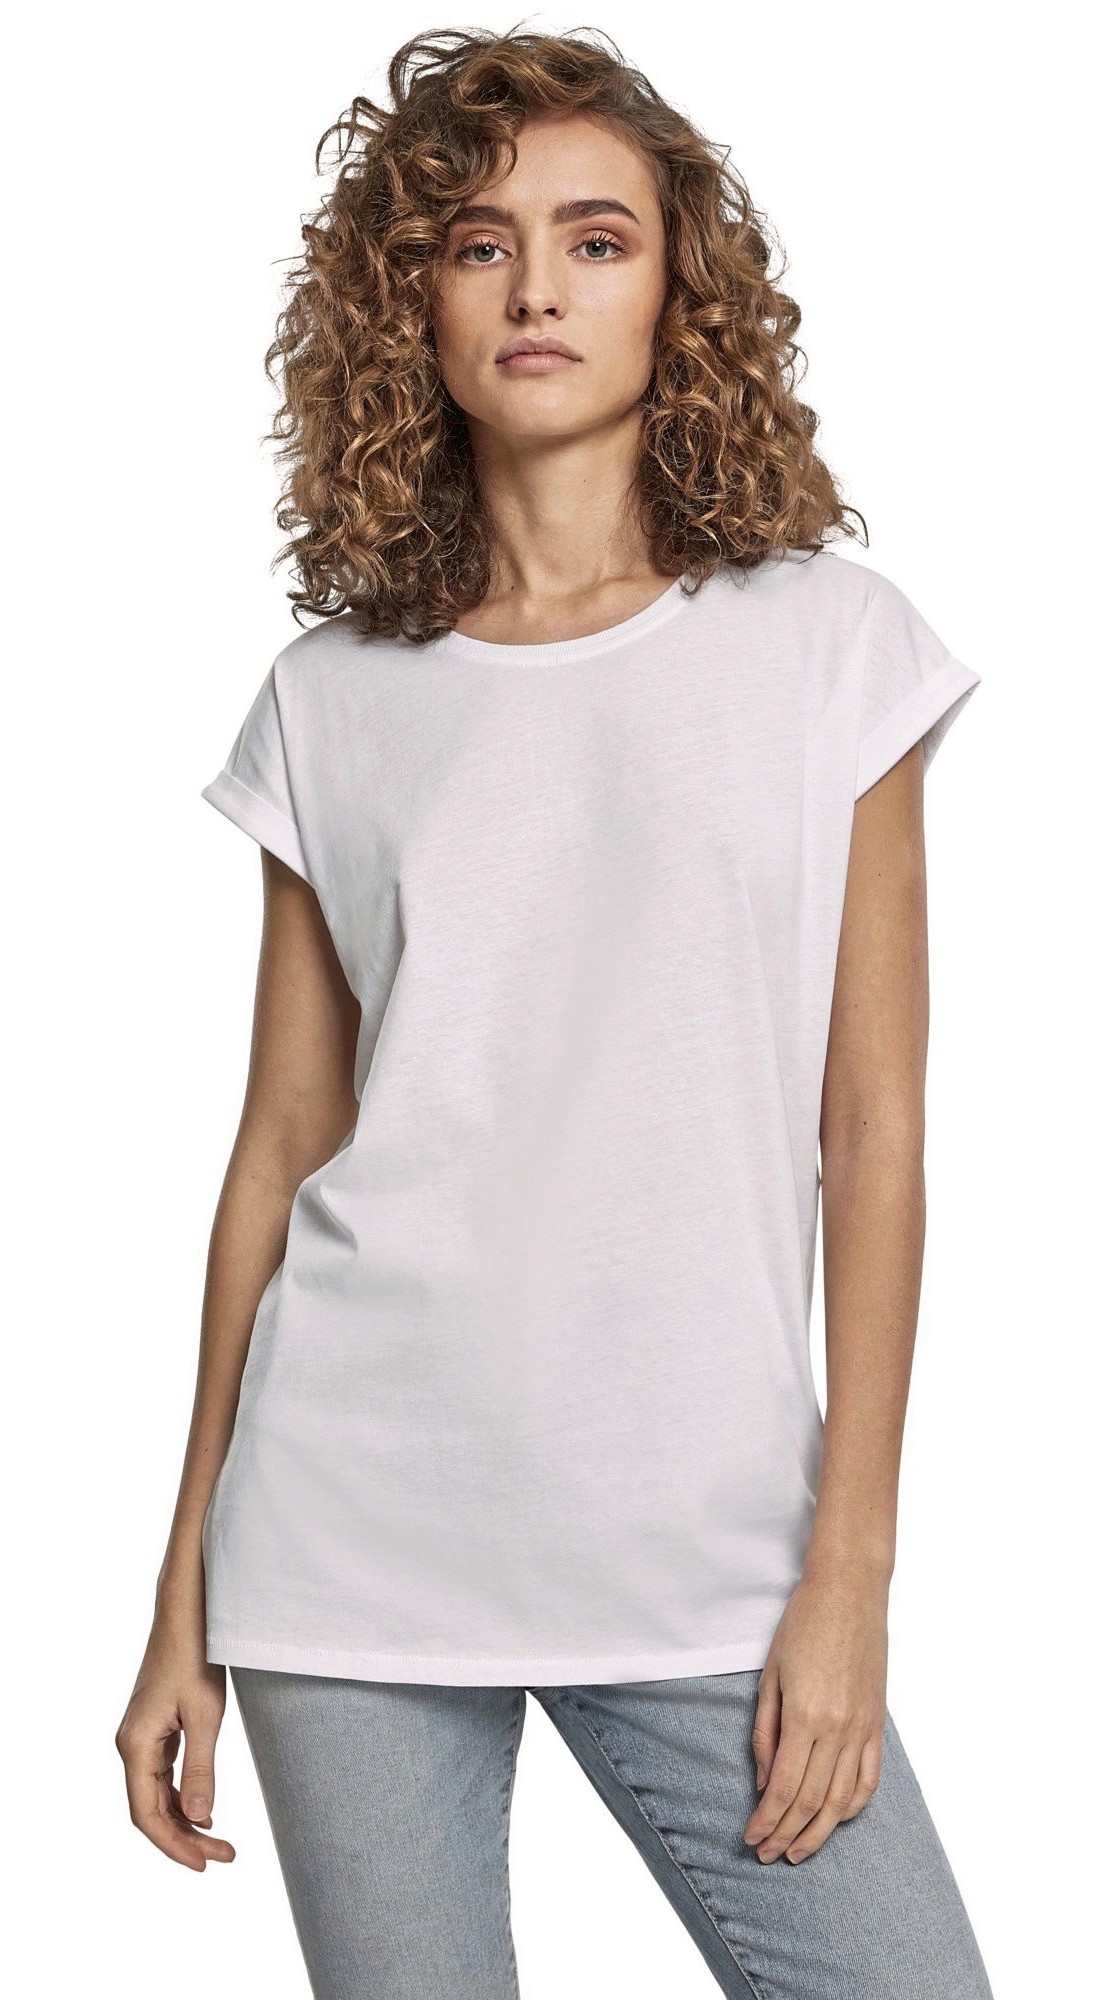 T-Shirts - Build Your Brand - Ladies´ Organic Extended Shoulder Tee - BY138